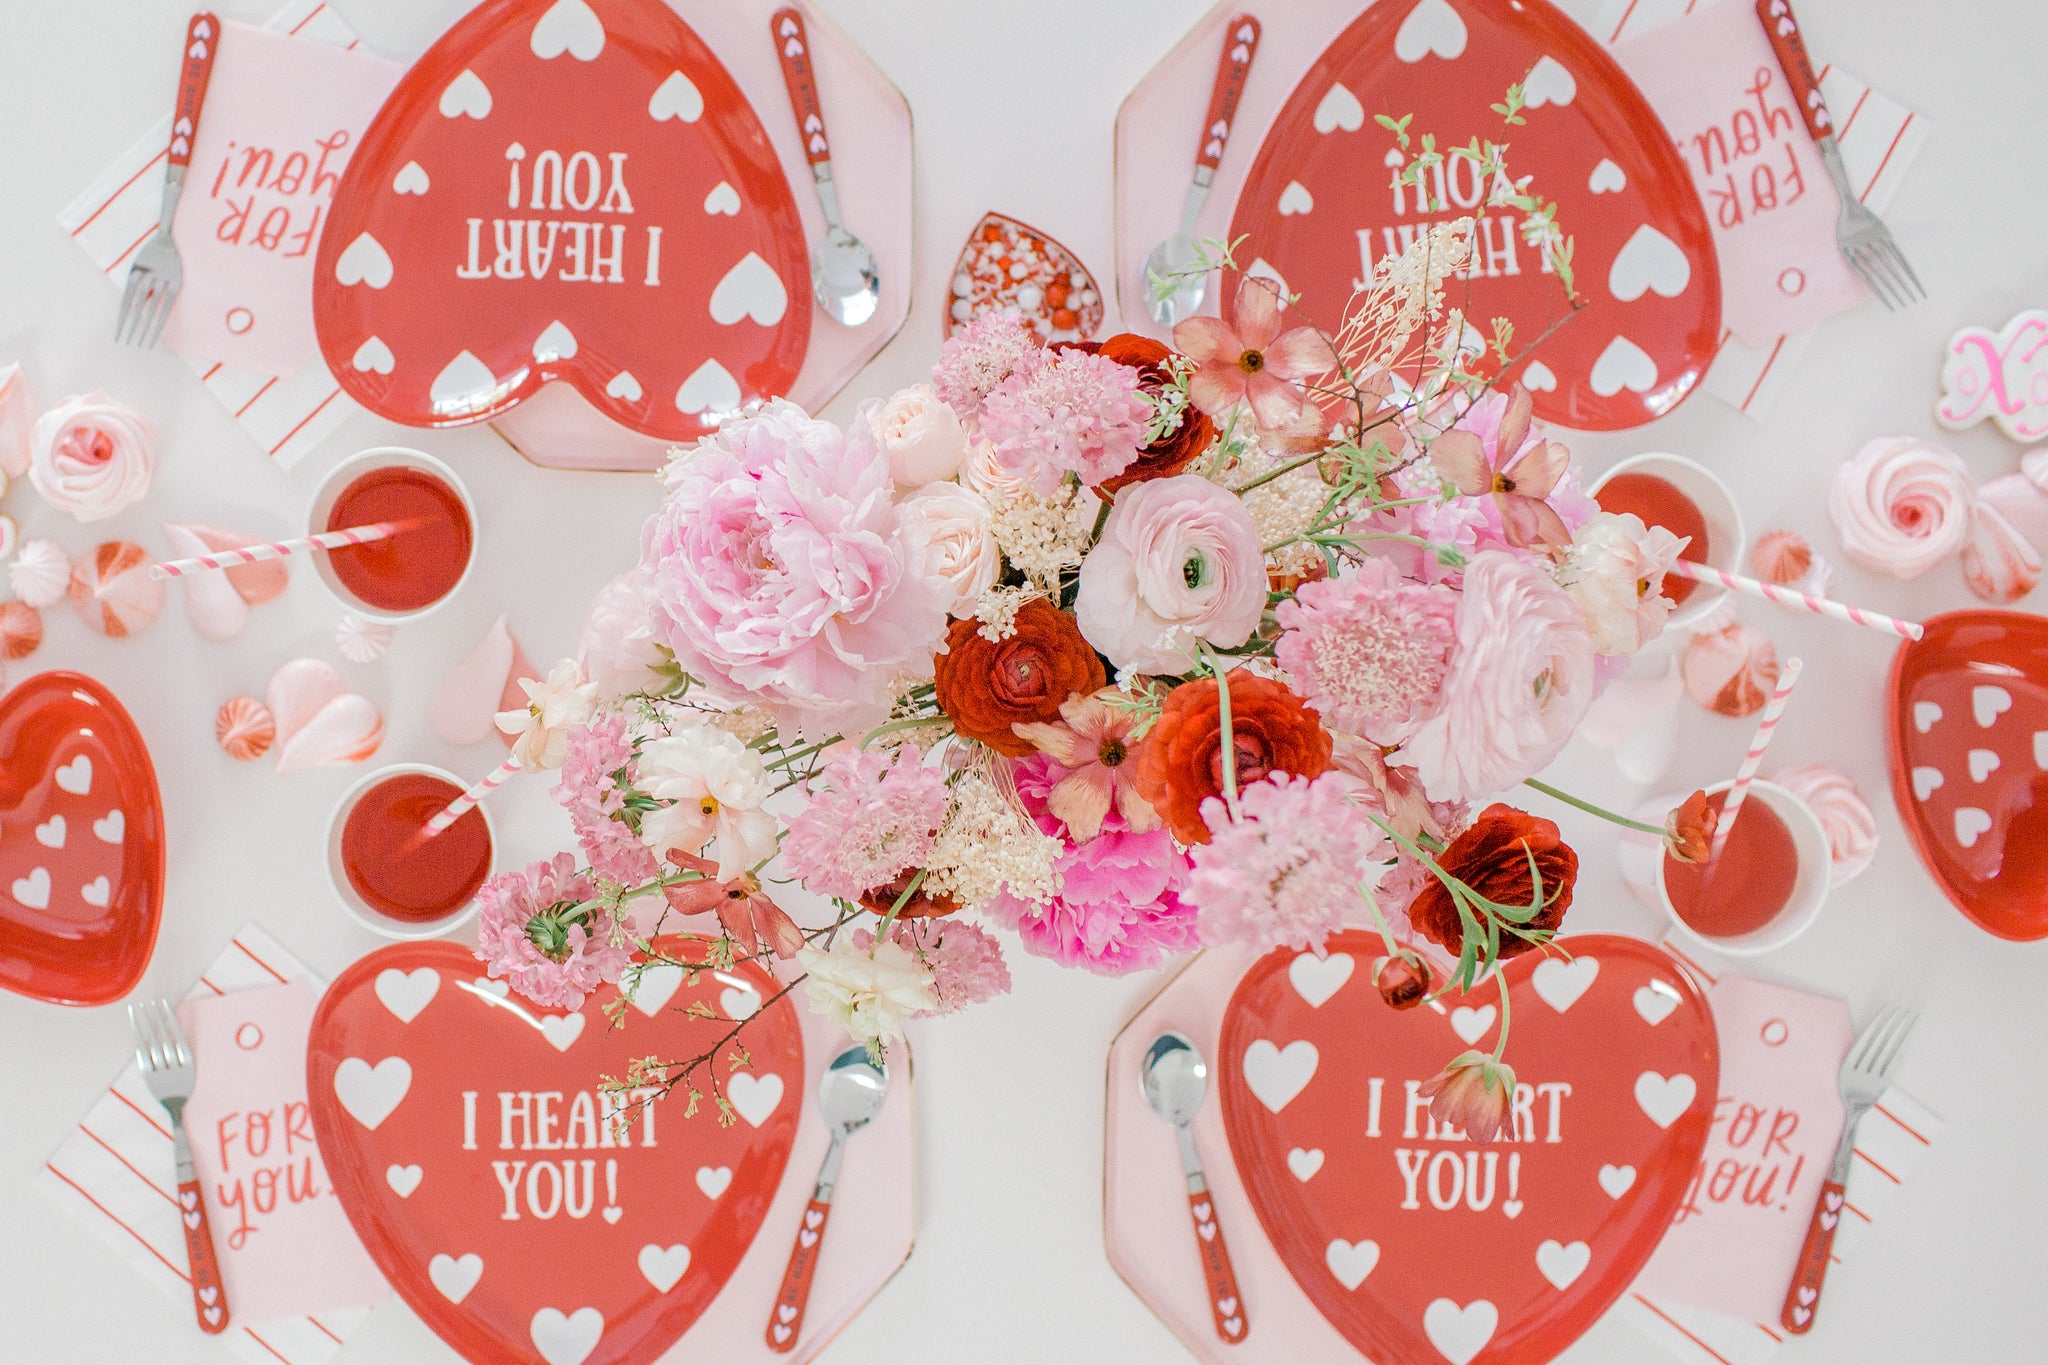 Classic Valentine's Day heart themed tableware